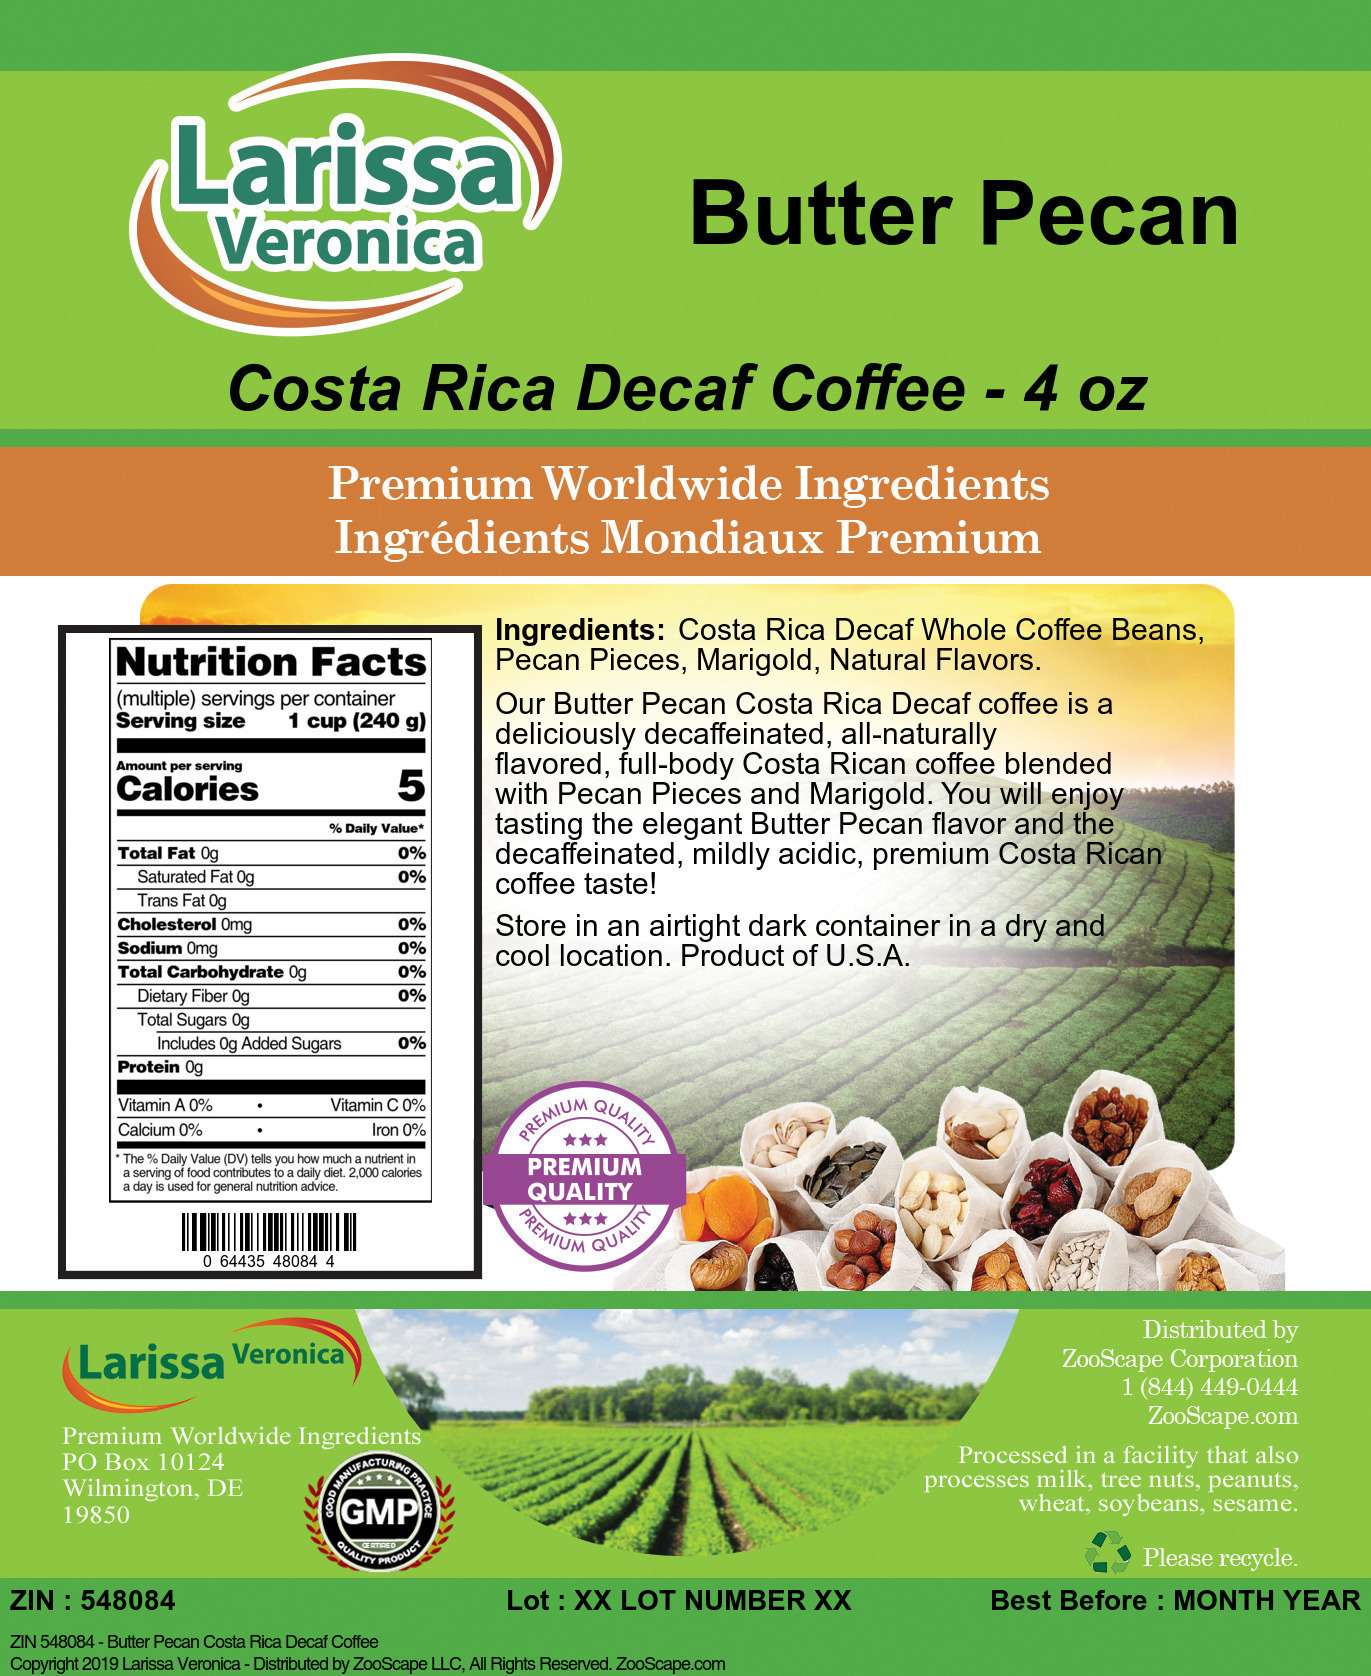 Butter Pecan Costa Rica Decaf Coffee - Label